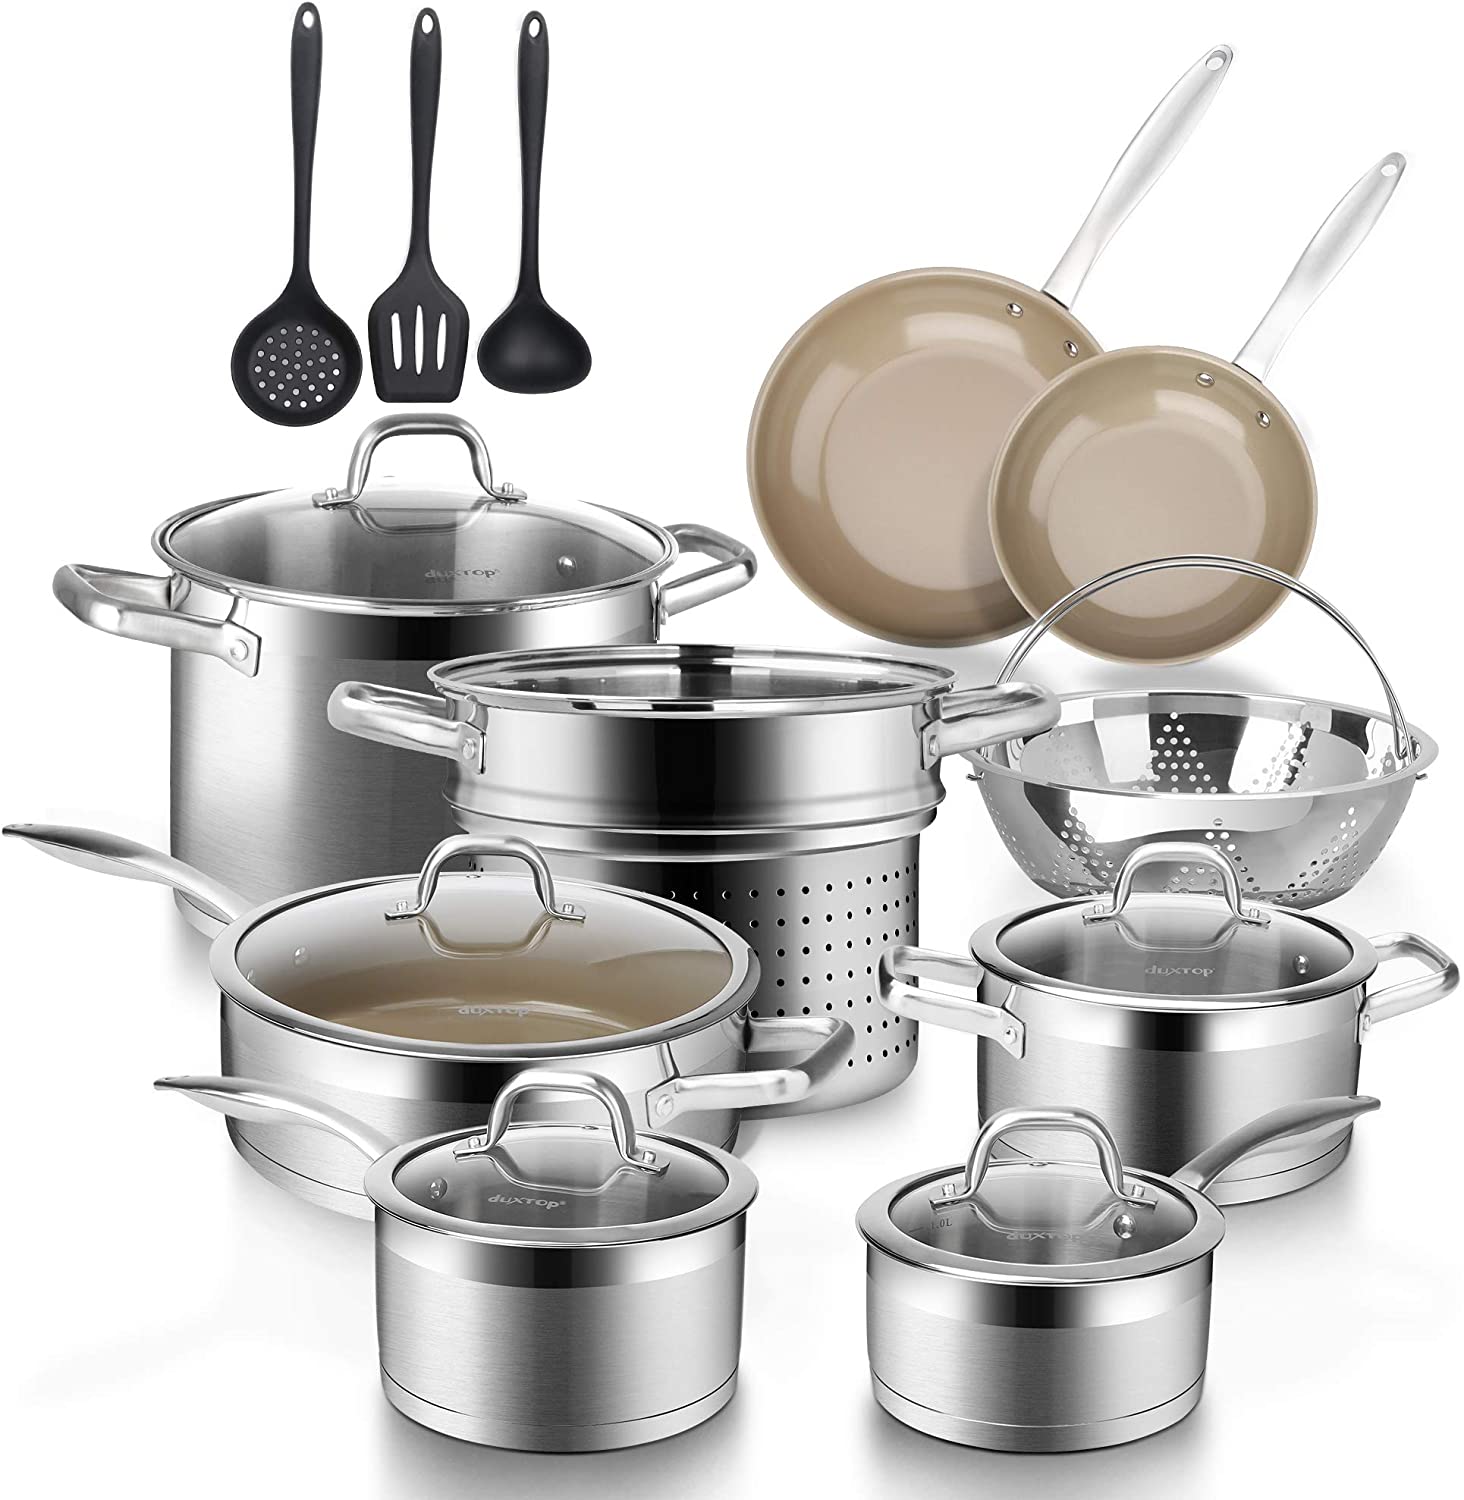 Duxtop Professional Stainless Steel Pots and Pans Set, 17PC Induction  Cookware Set, Impact-bonded Technology